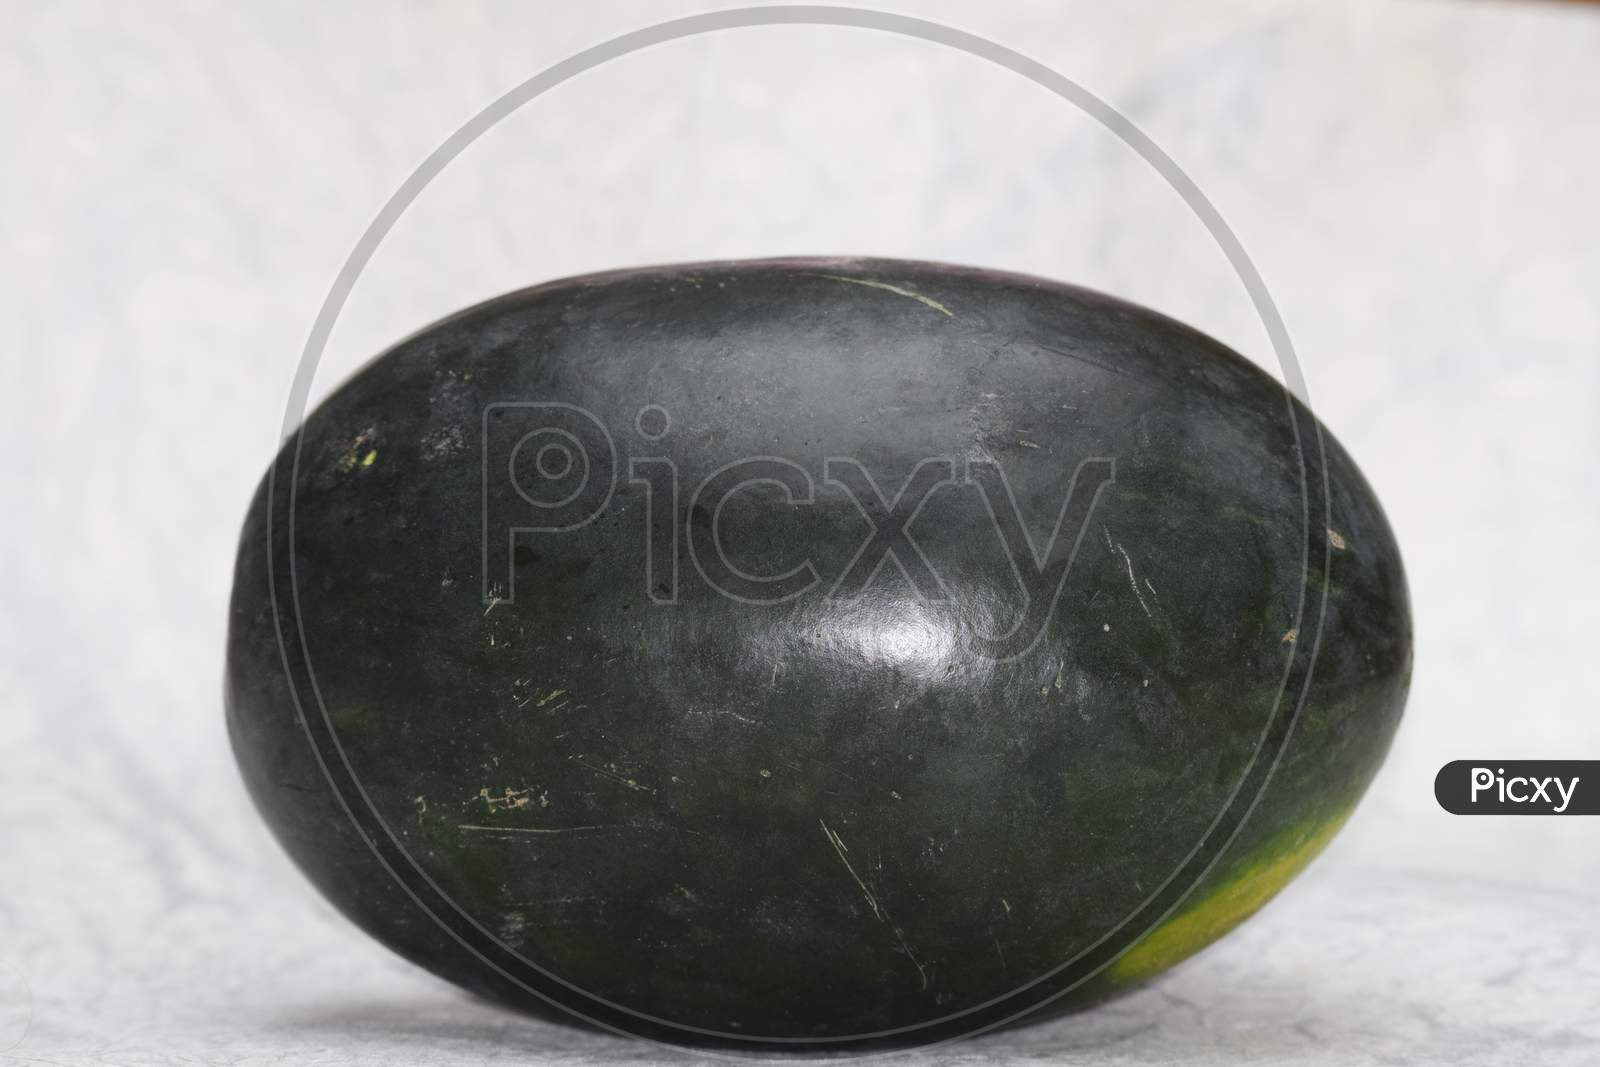 Watermelon Fruit From Asia India. Fresh Indian Fruit Water Melon Also Known As Tarbuz In India, Pakistan, Nepal Isolated Single Piece On White Background